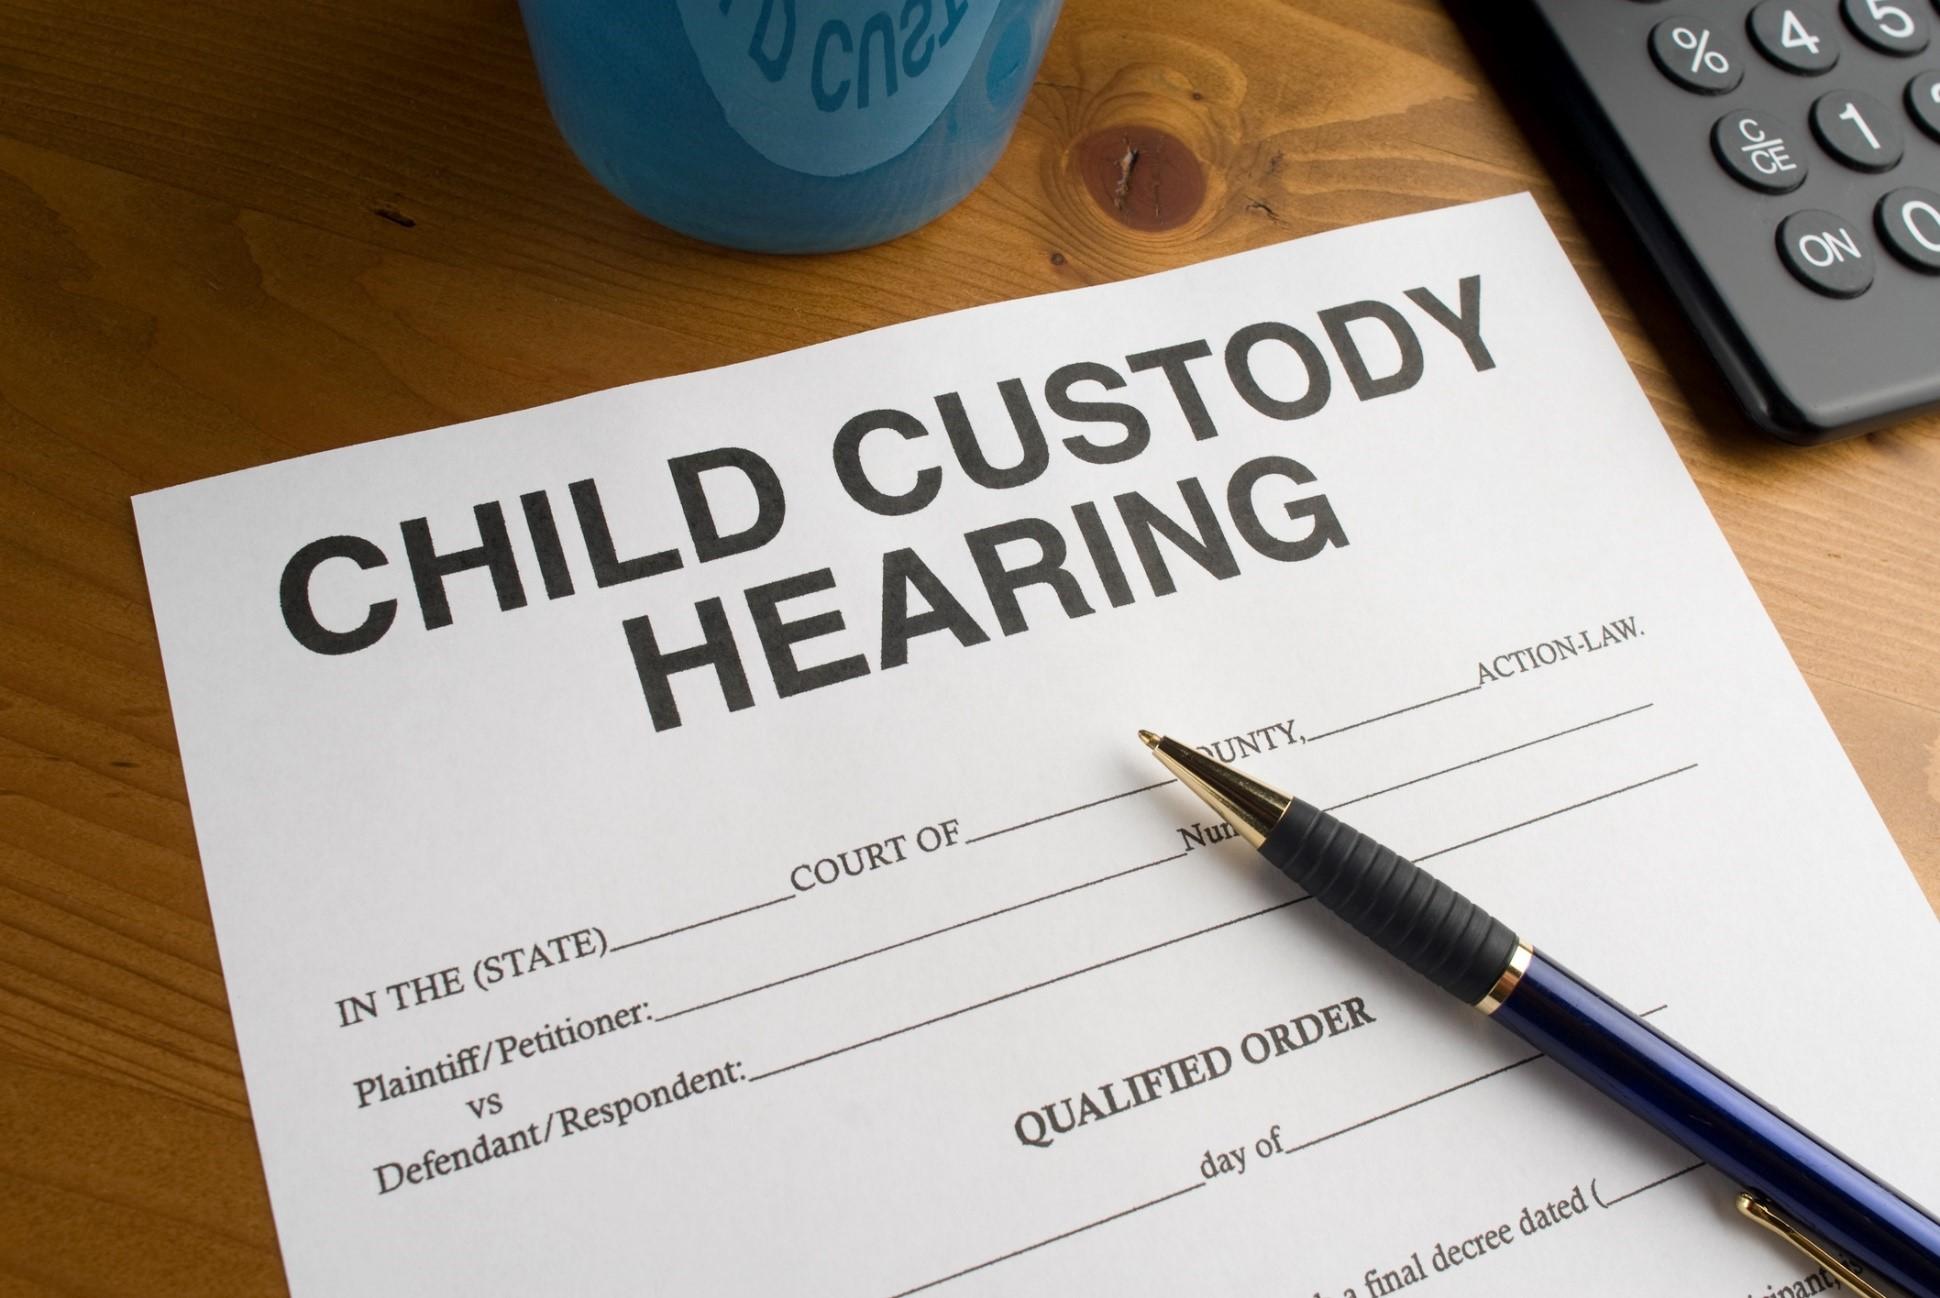 Read this guide to learn what to expect during a child custody hearing. For legal guidance and representation on family law matters, consult Shea Law in Kennewick, Washington